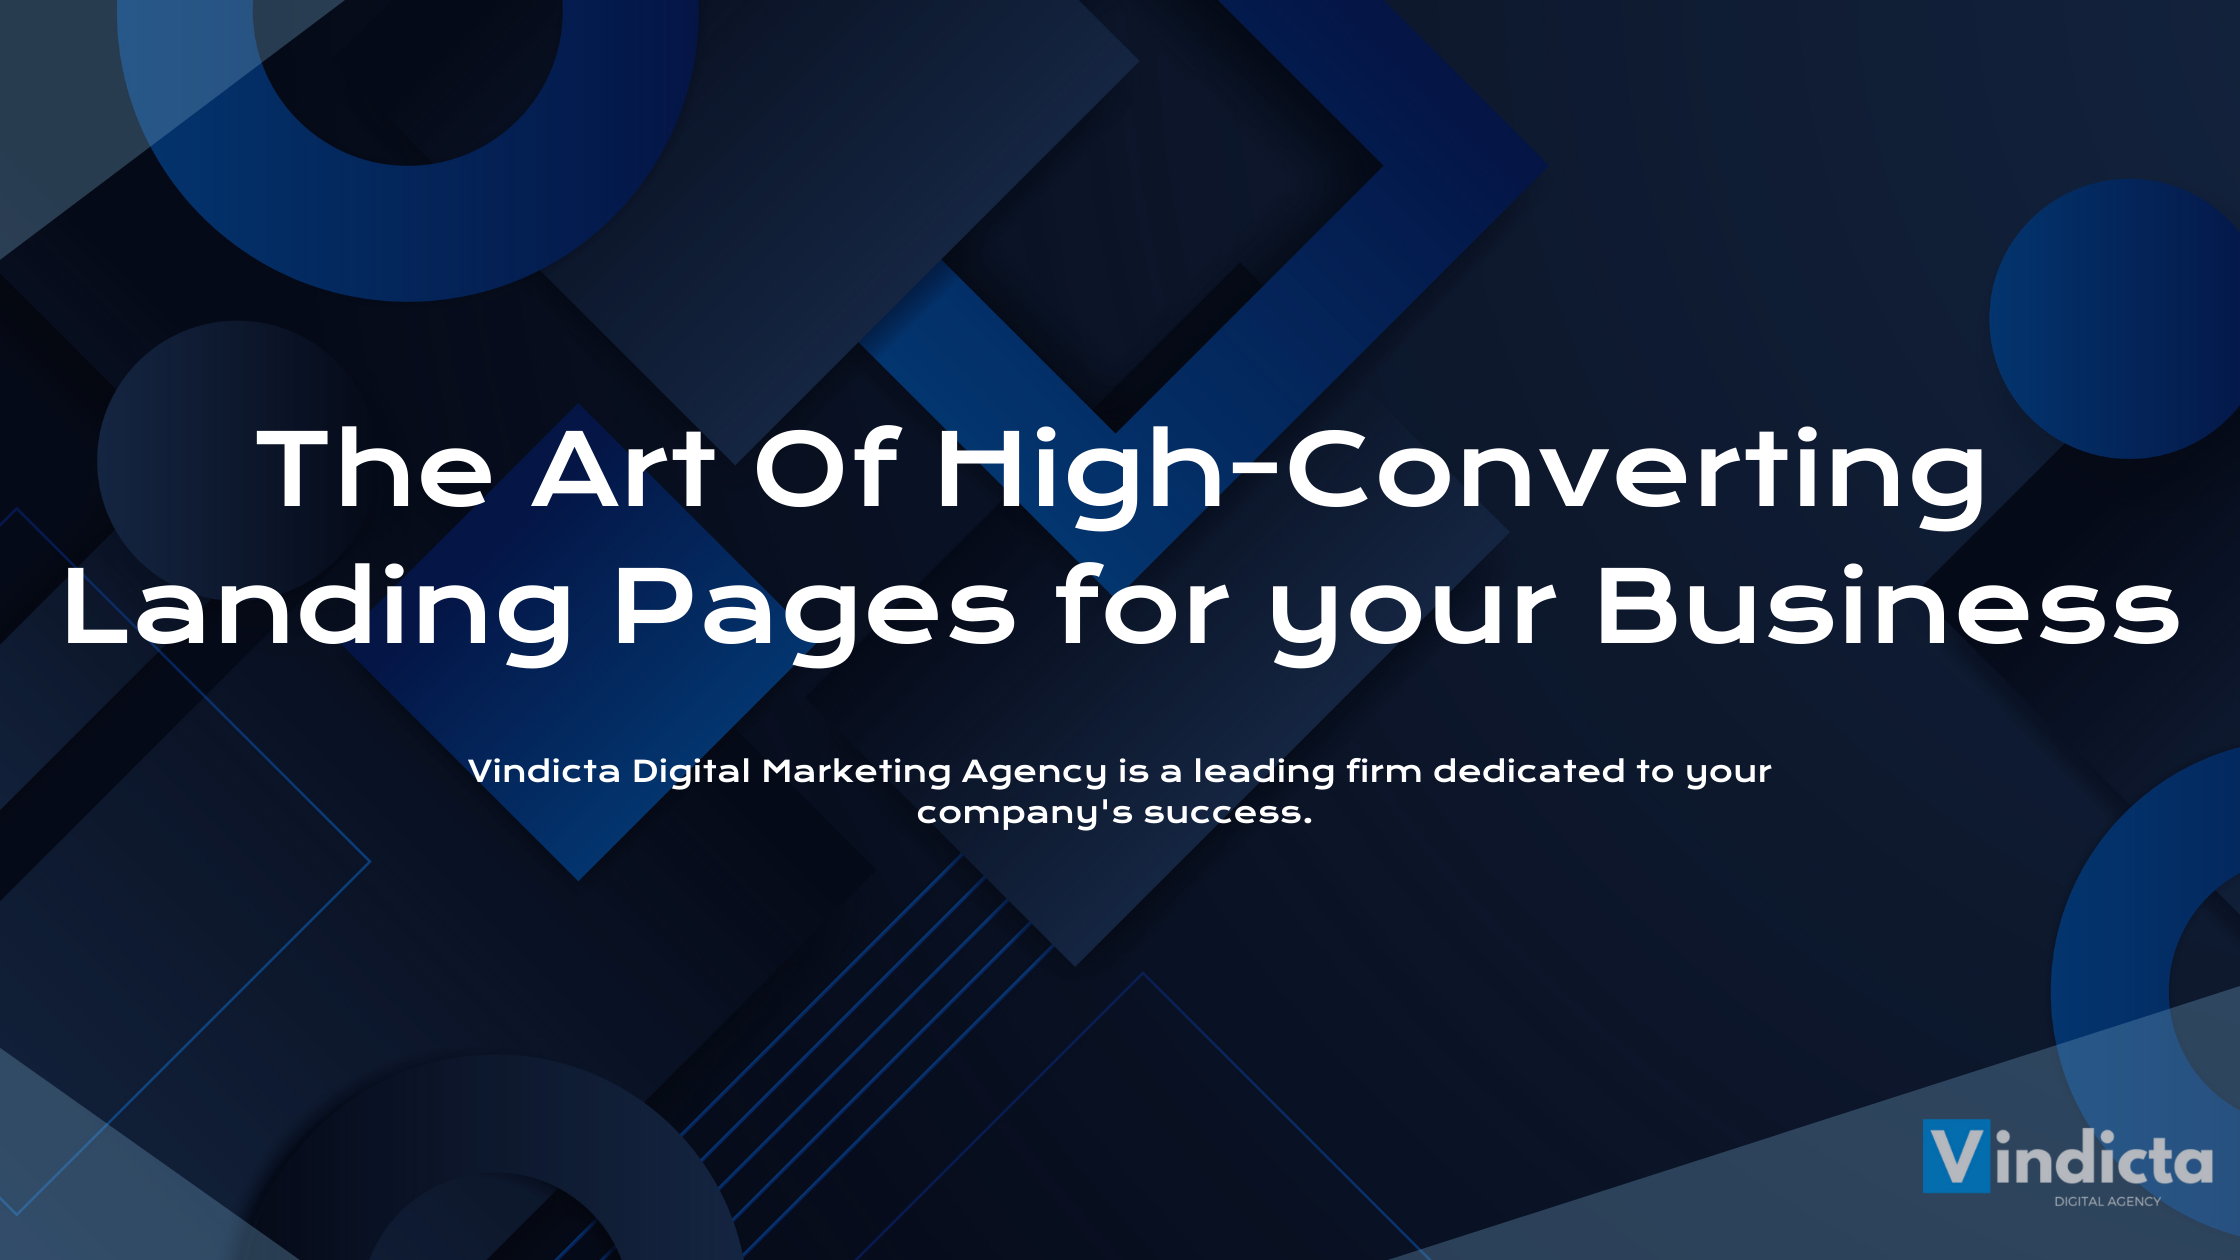 The Art Of High-Converting Landing Pages for your Business